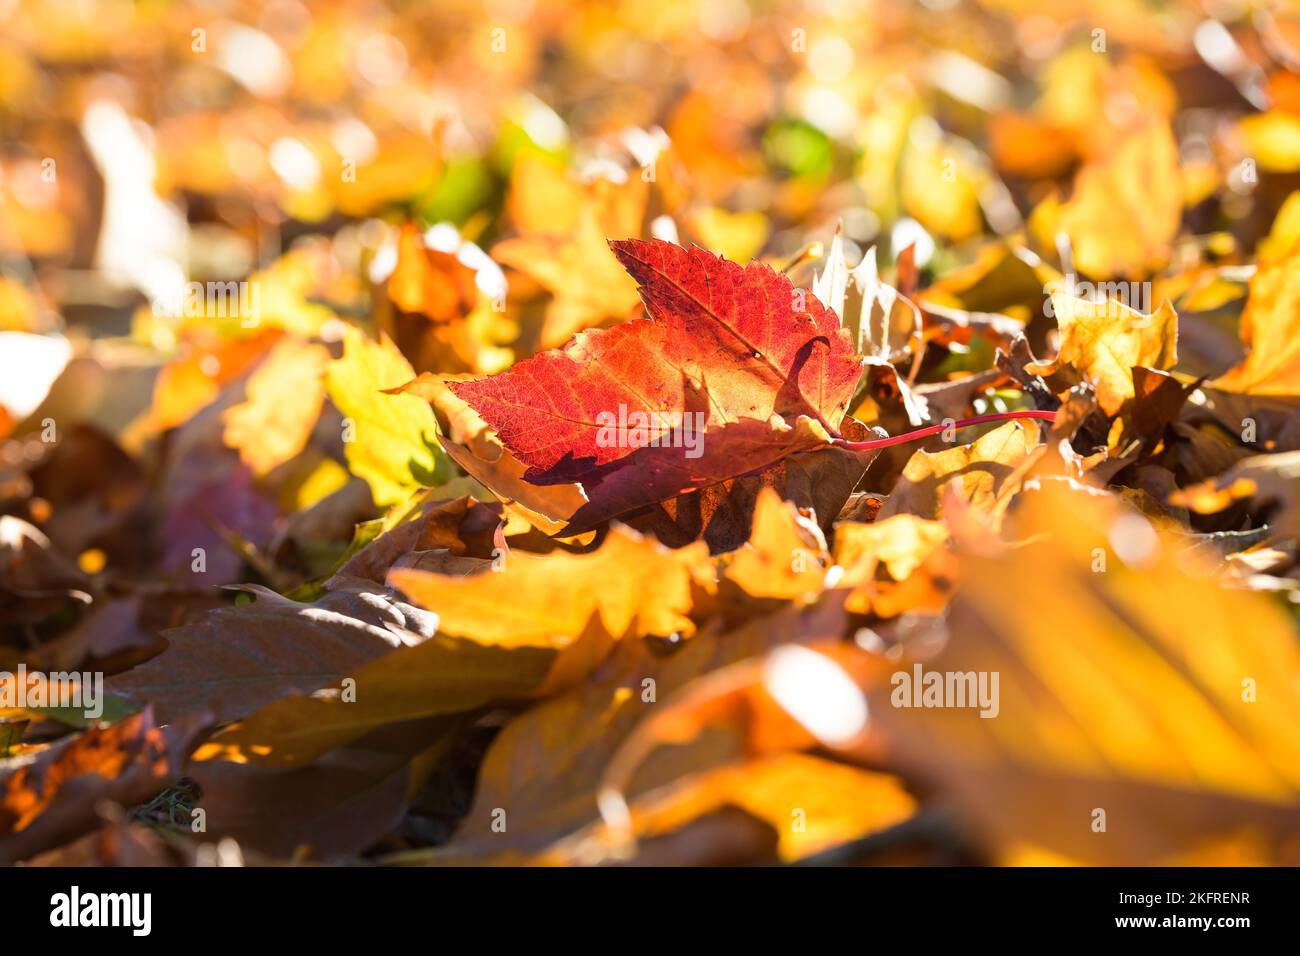 Fallen red leaf on a carpet of orange leaves in autumn creating a warm autumnal background Stock Photo